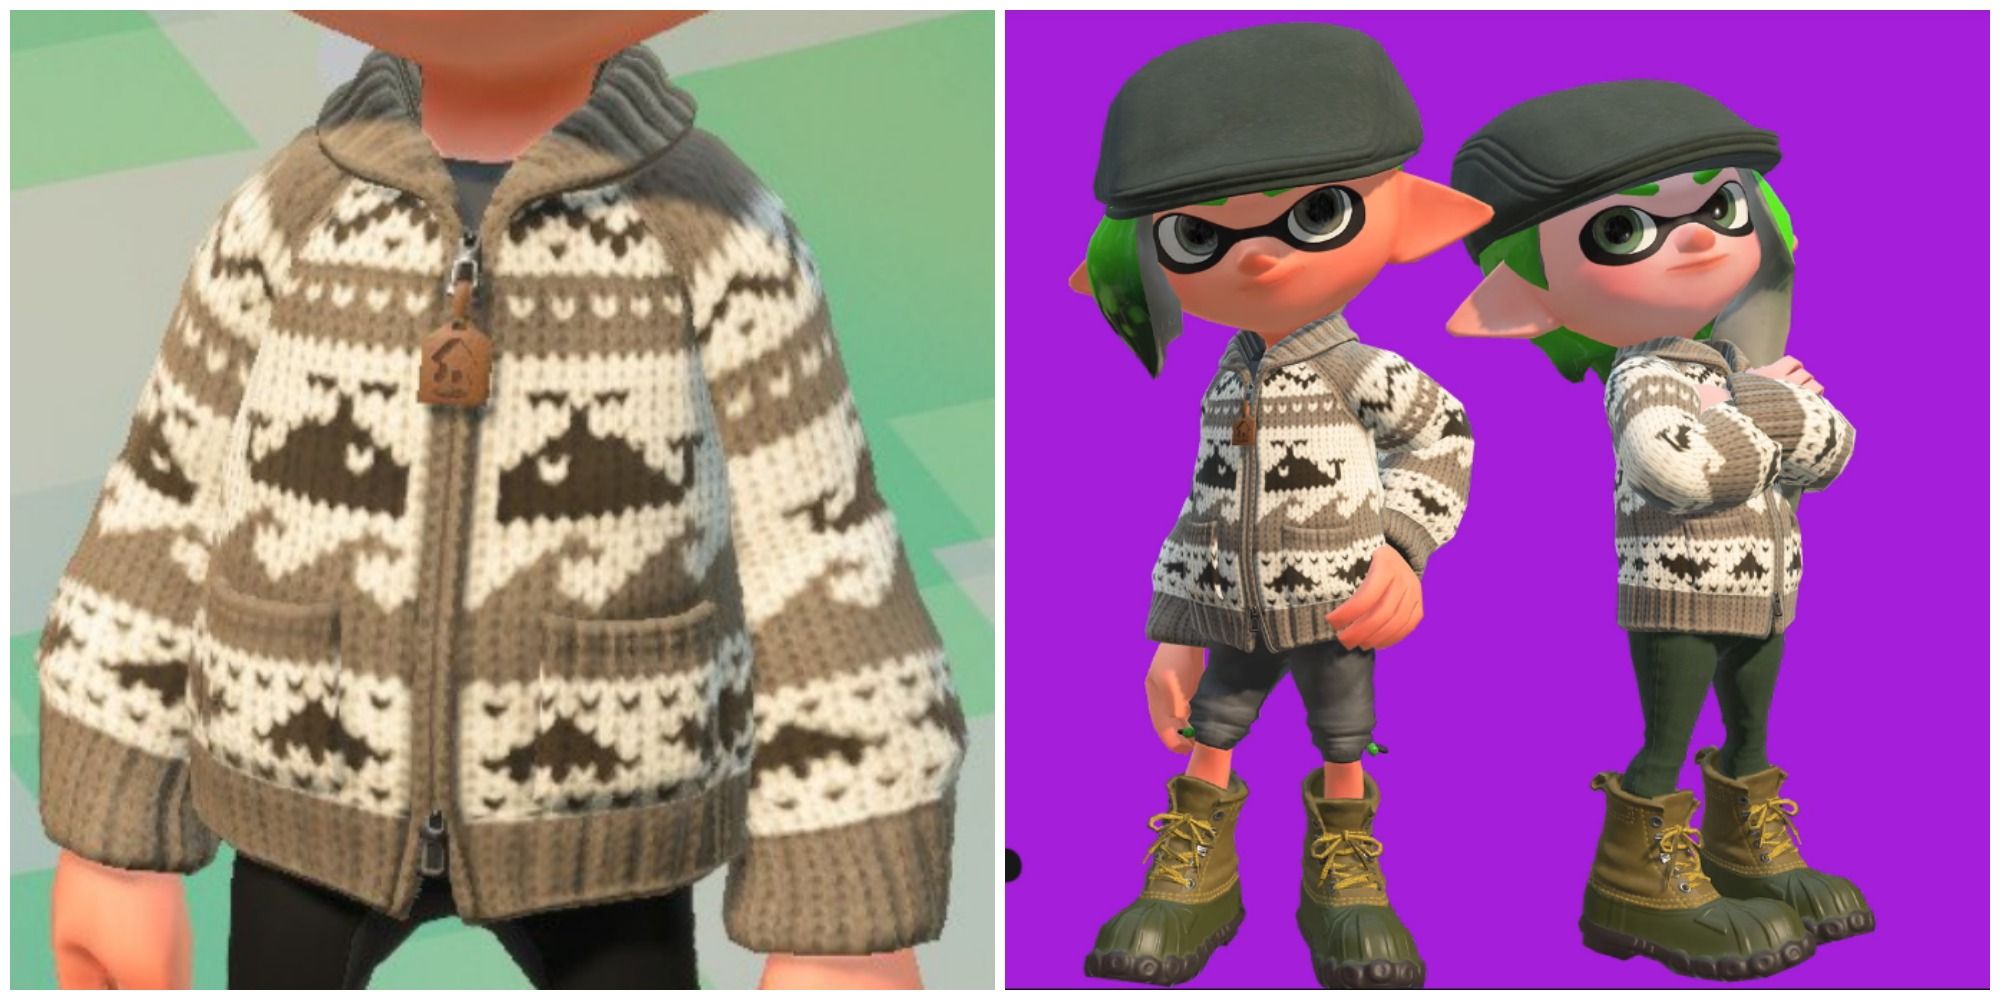 Split image of front of Whale Knitted Sweater and two green-haired Inklings wearing sweater against a purple background